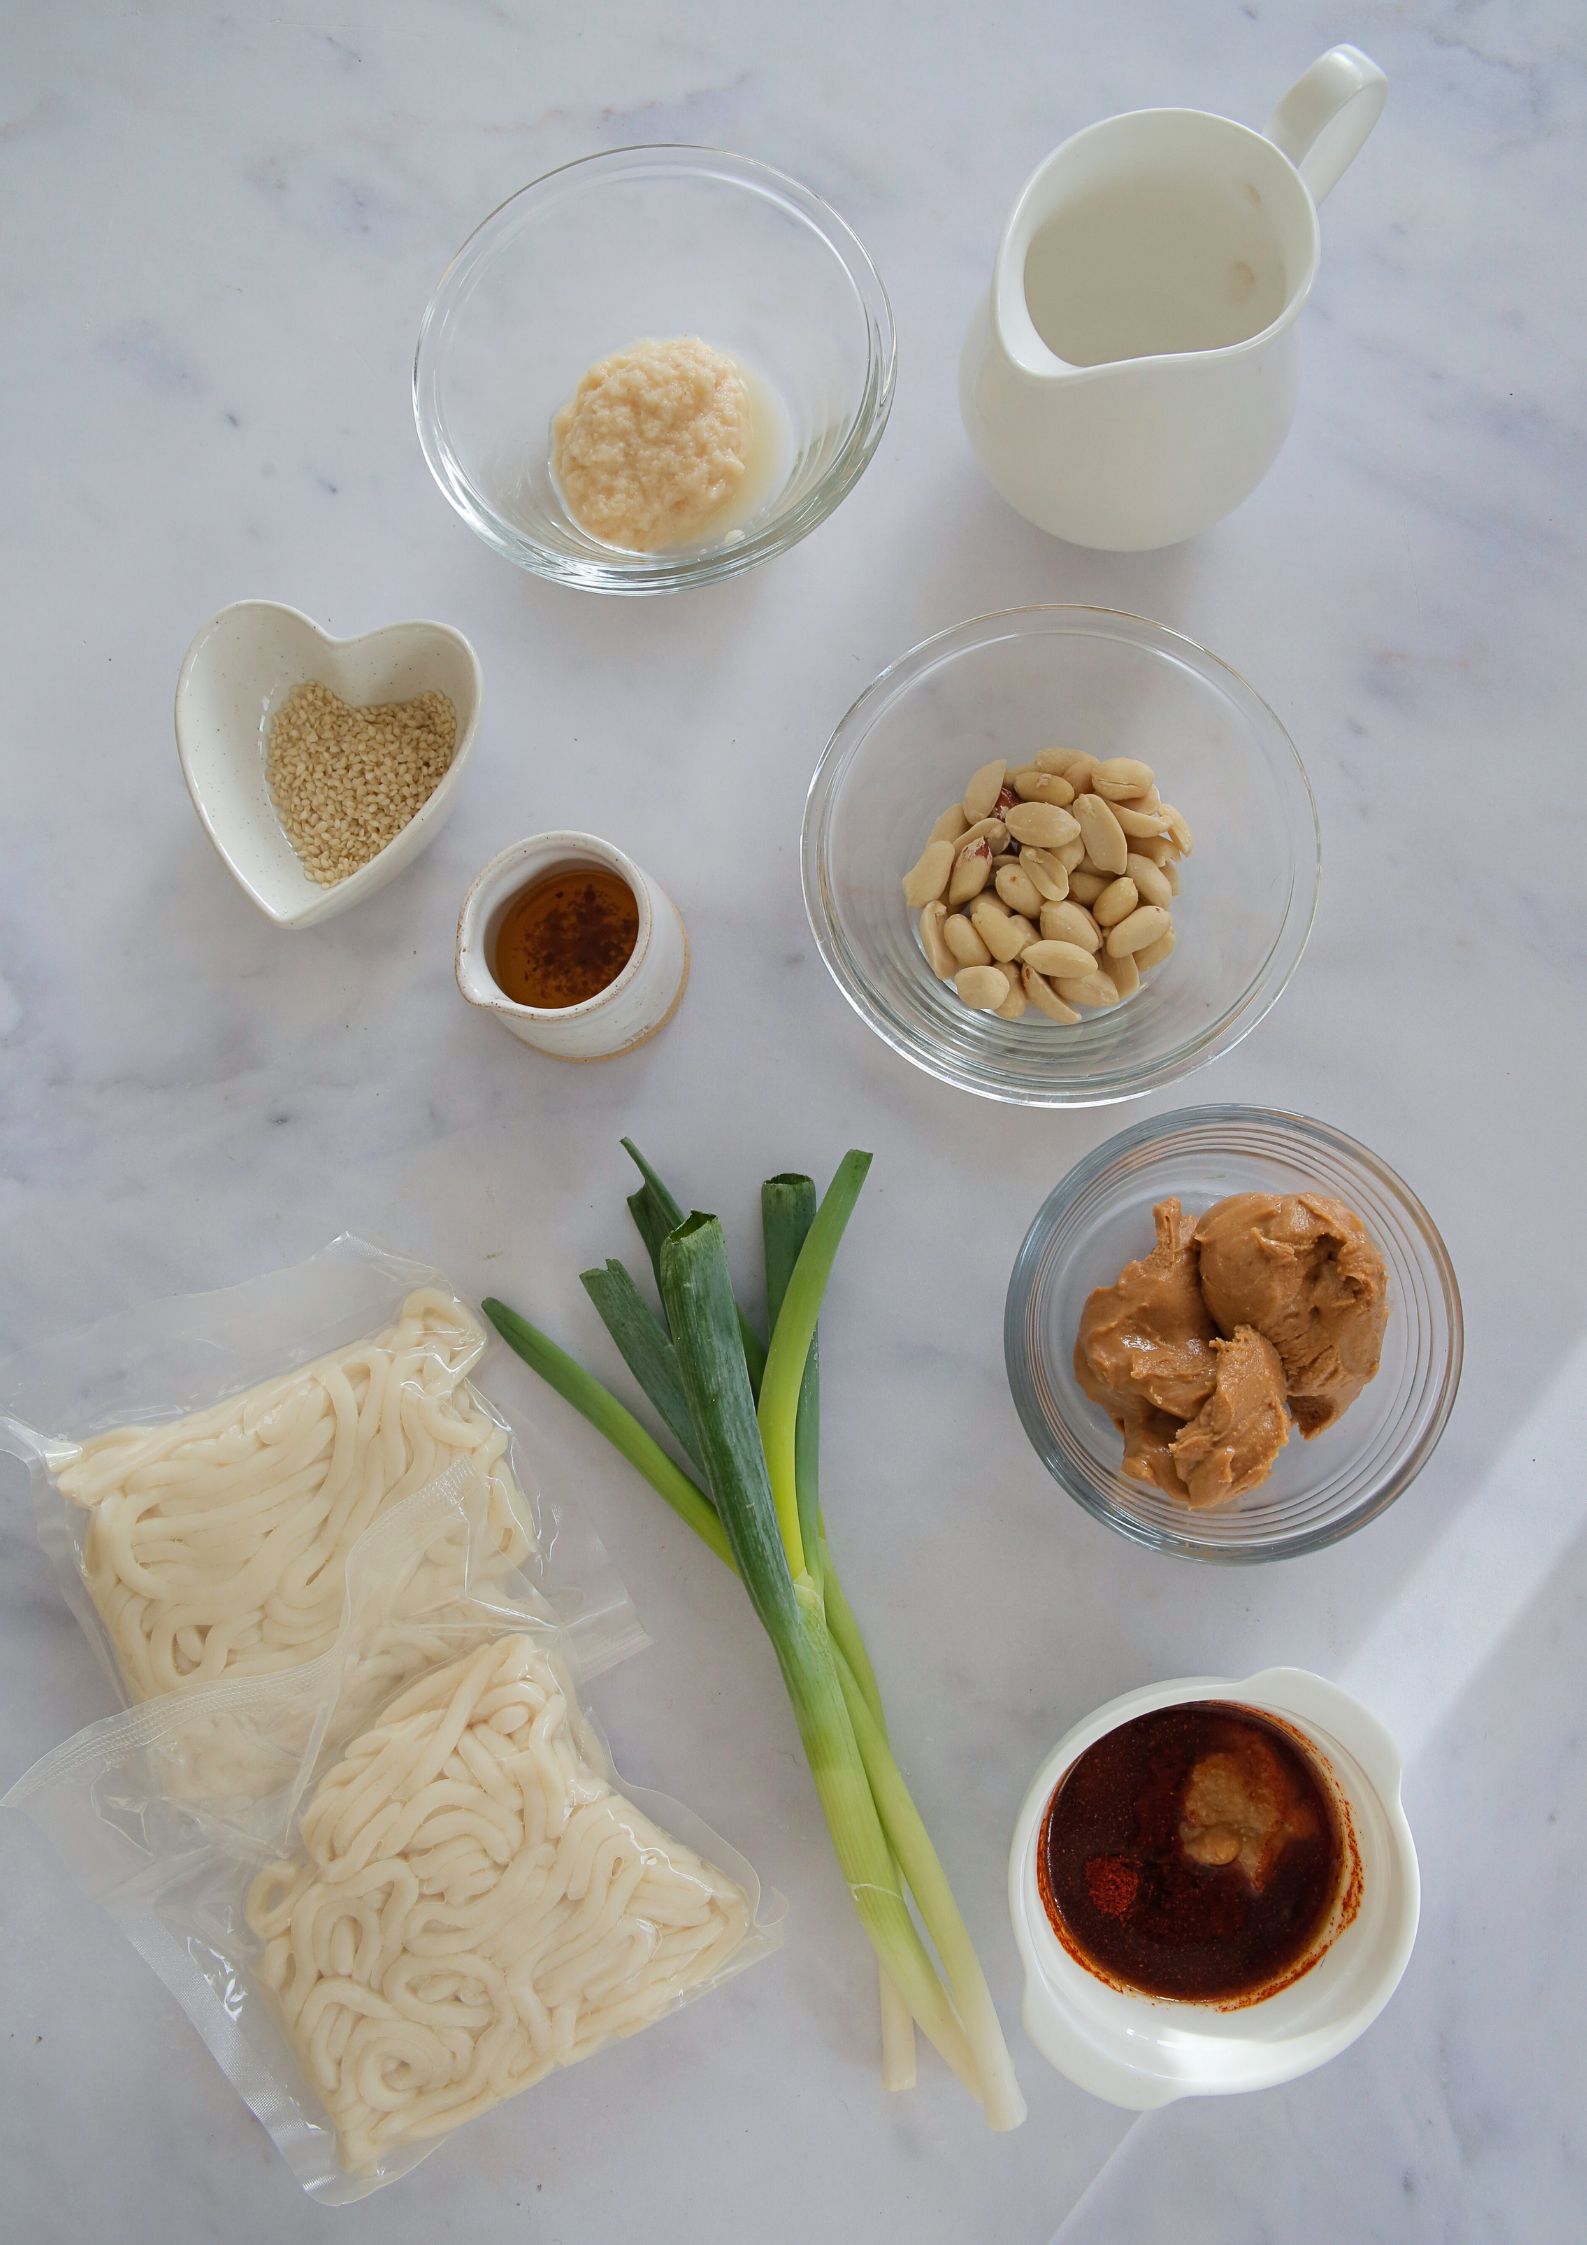 Perfect for when you're hungry but short on time to cook, these peanut noodles are gently spiced but full of rich flavour. An easy meal for any night of the week! Full recipe on thecookandhim.com | #peanutnoodles #spicynoodles #peanutbutternoodles #easydinnerideas